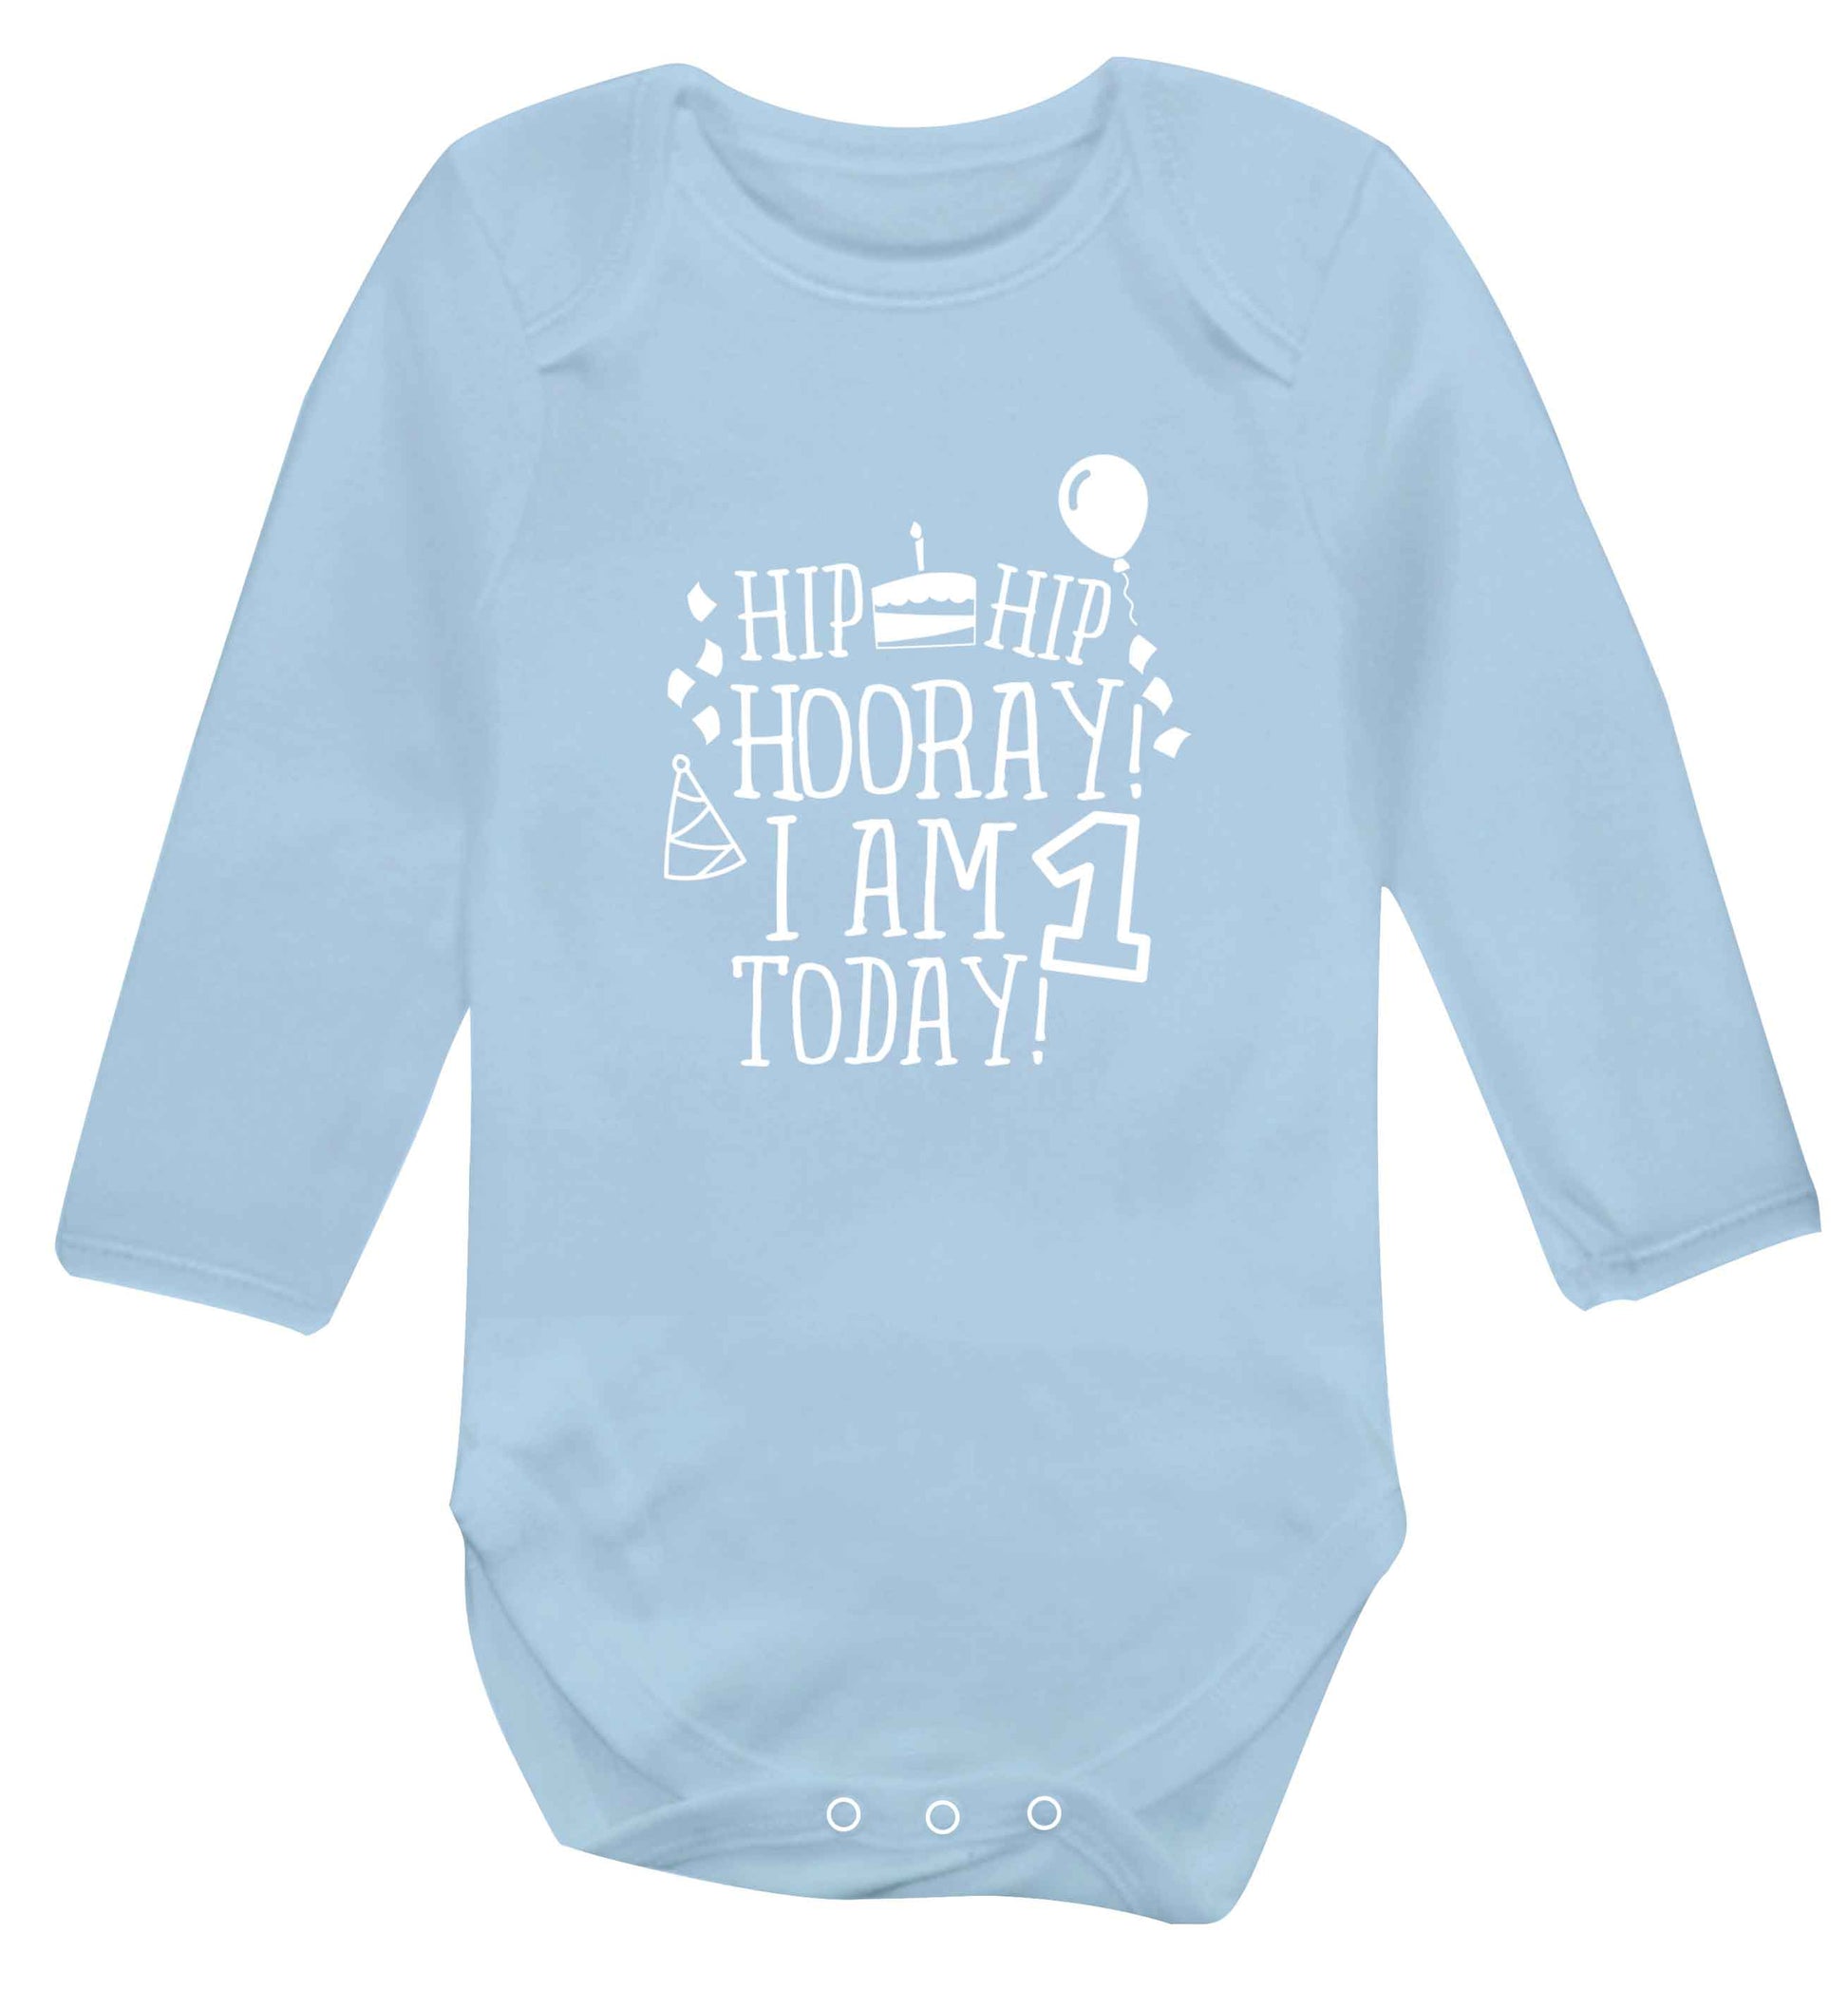 You're 2 Today baby vest long sleeved pale blue 6-12 months